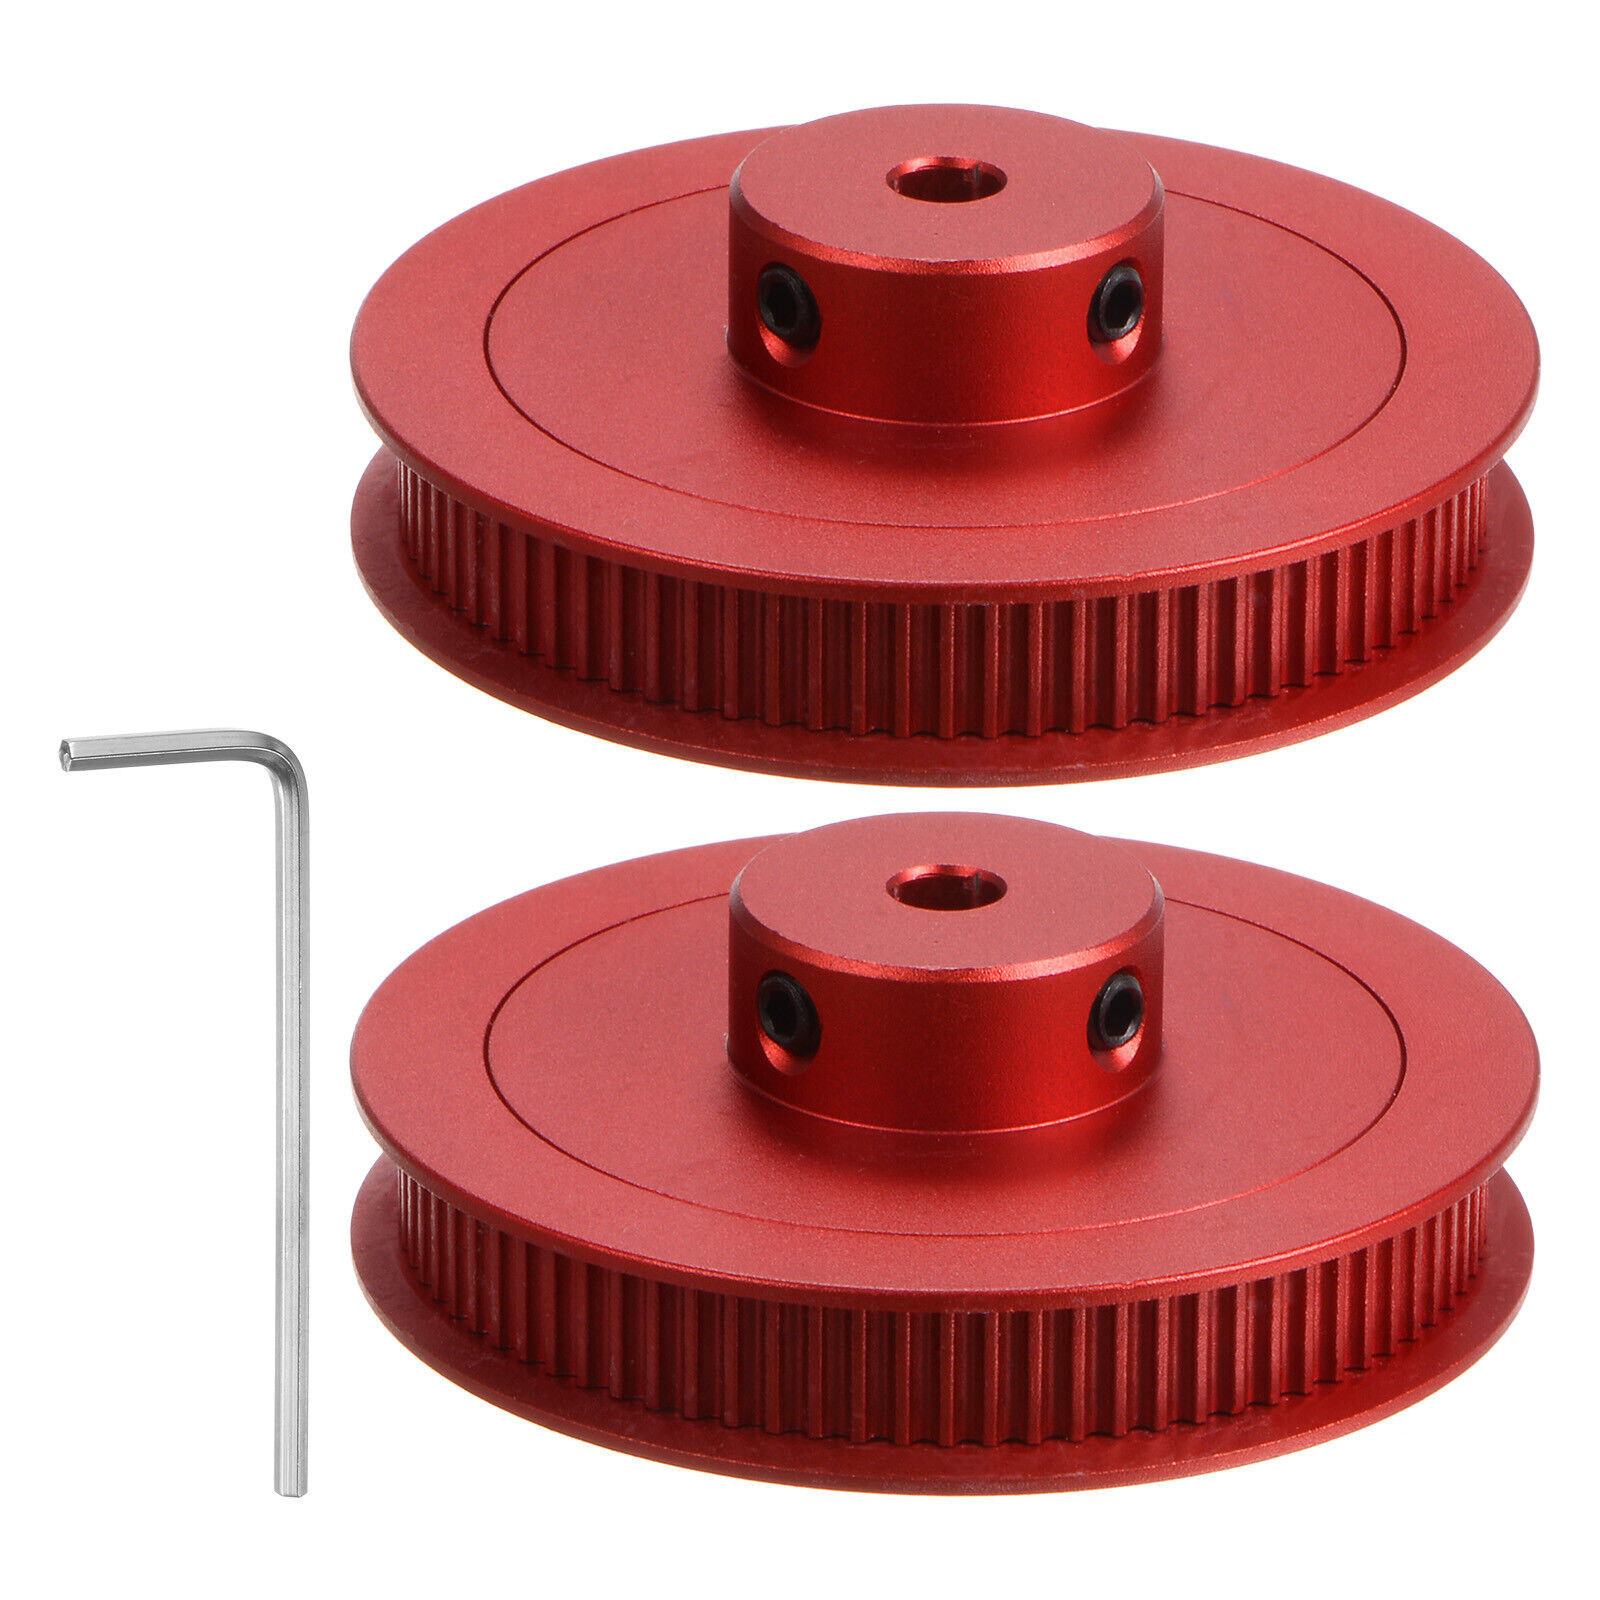 2pcs 2GT Timing Pulley 80T 5mm Bore 55mm Dia Aluminum Pulley for 6mm Belt, Red